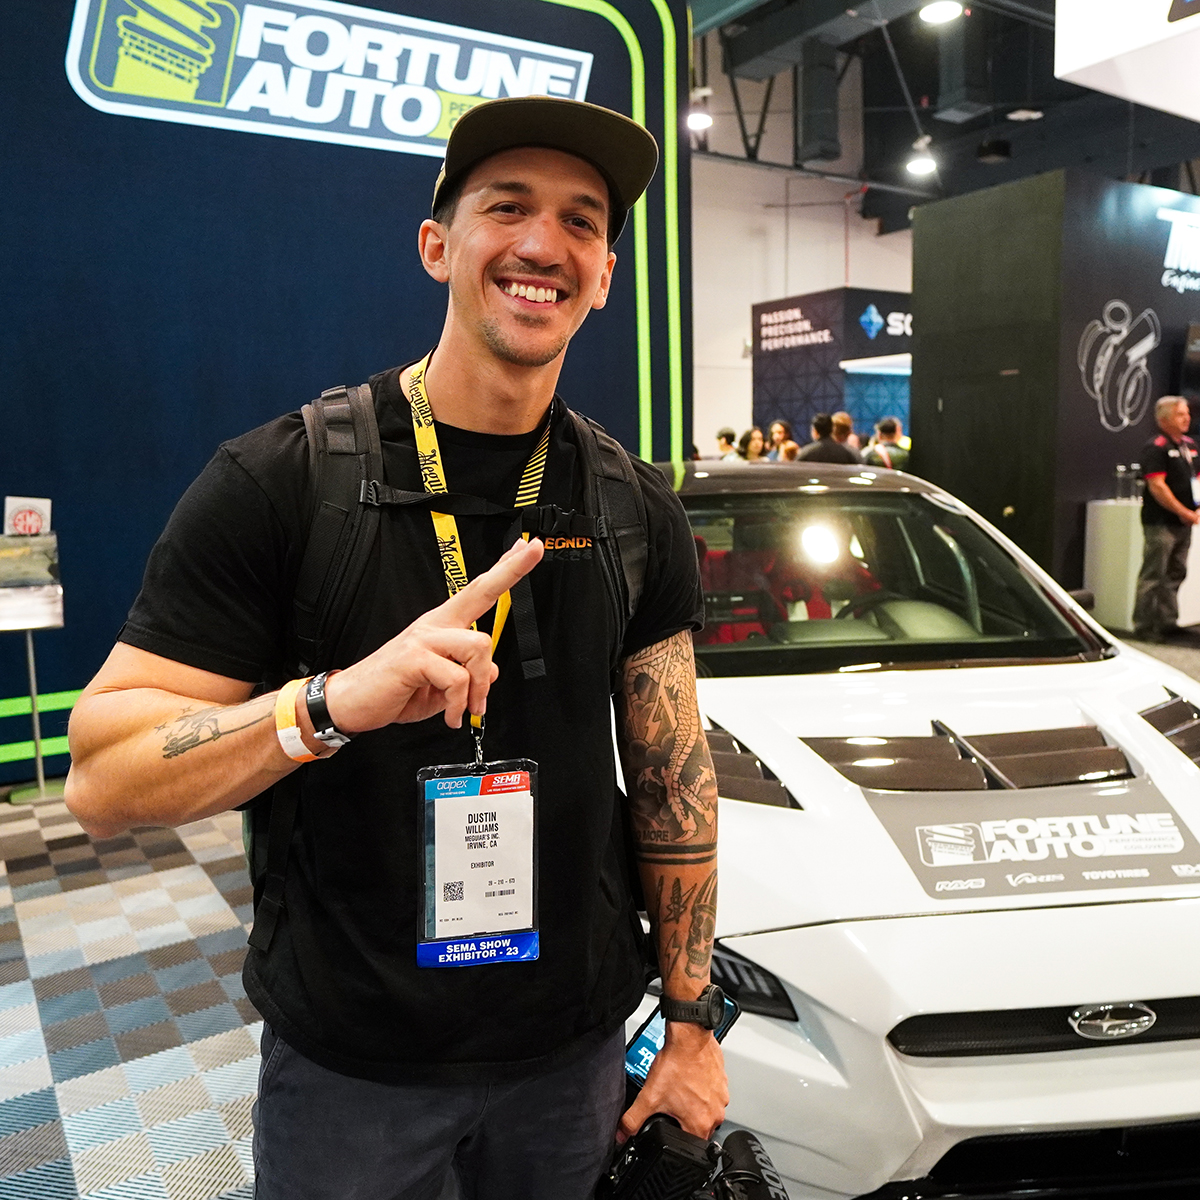 Dustin Williams visiting the fortune auto booth at the sema show in 2023